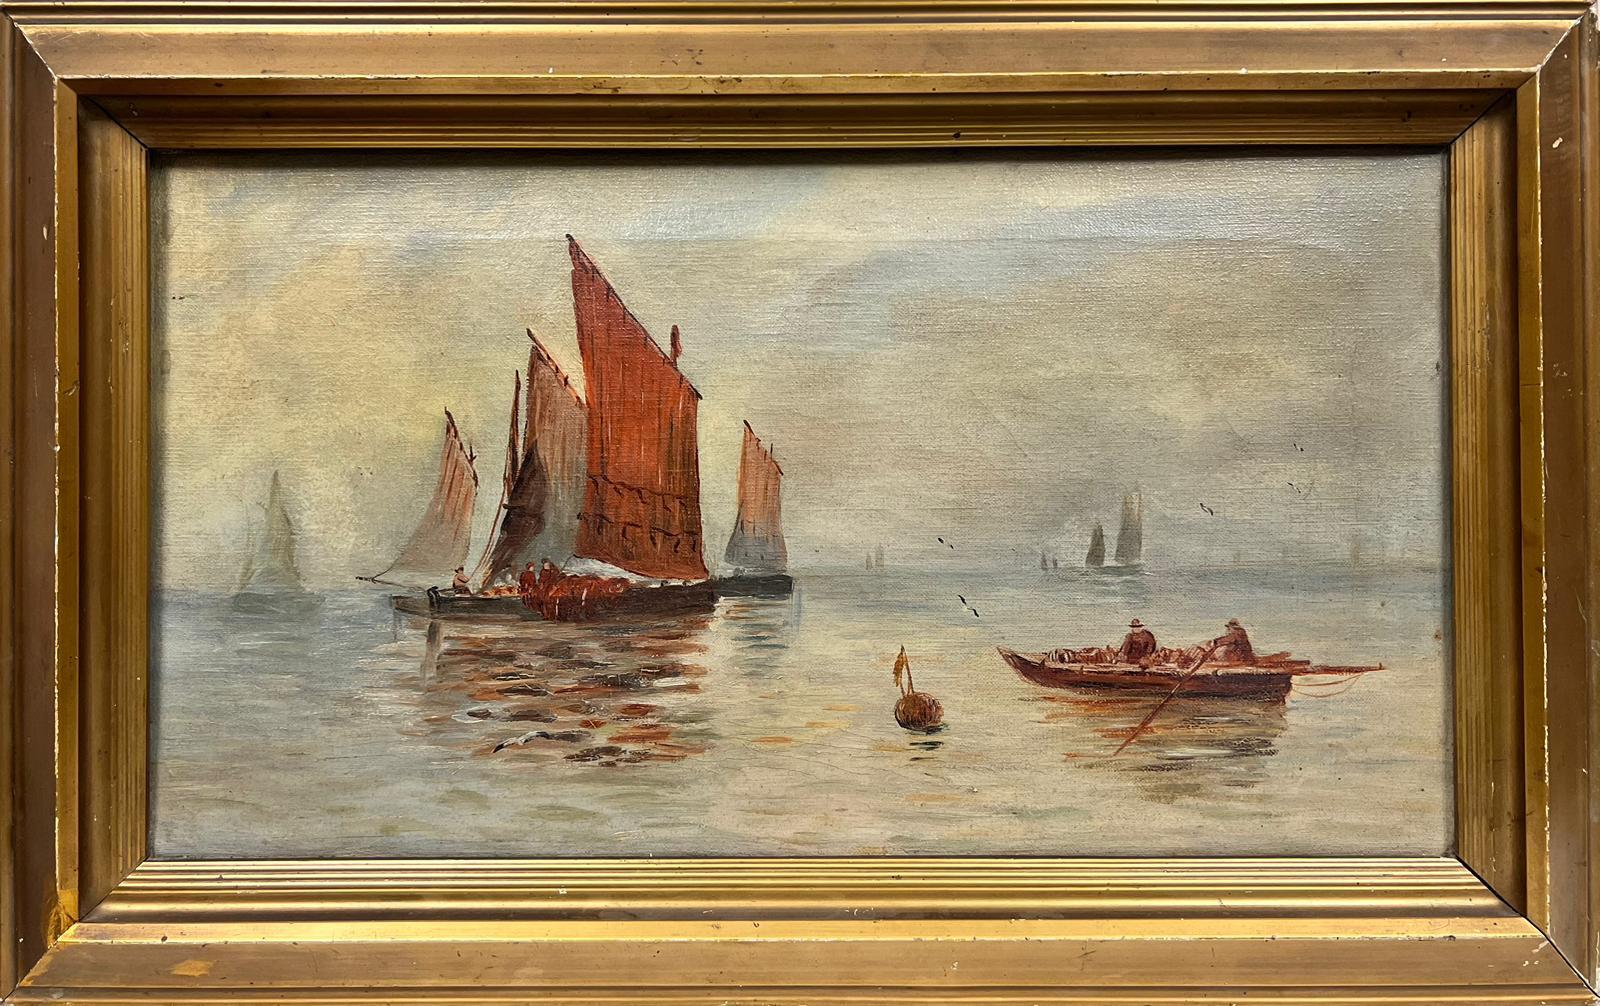 Antique British Figurative Painting - Fishing Boats at Sea Tranquil Antique English Oil Painting in Gilt Frame